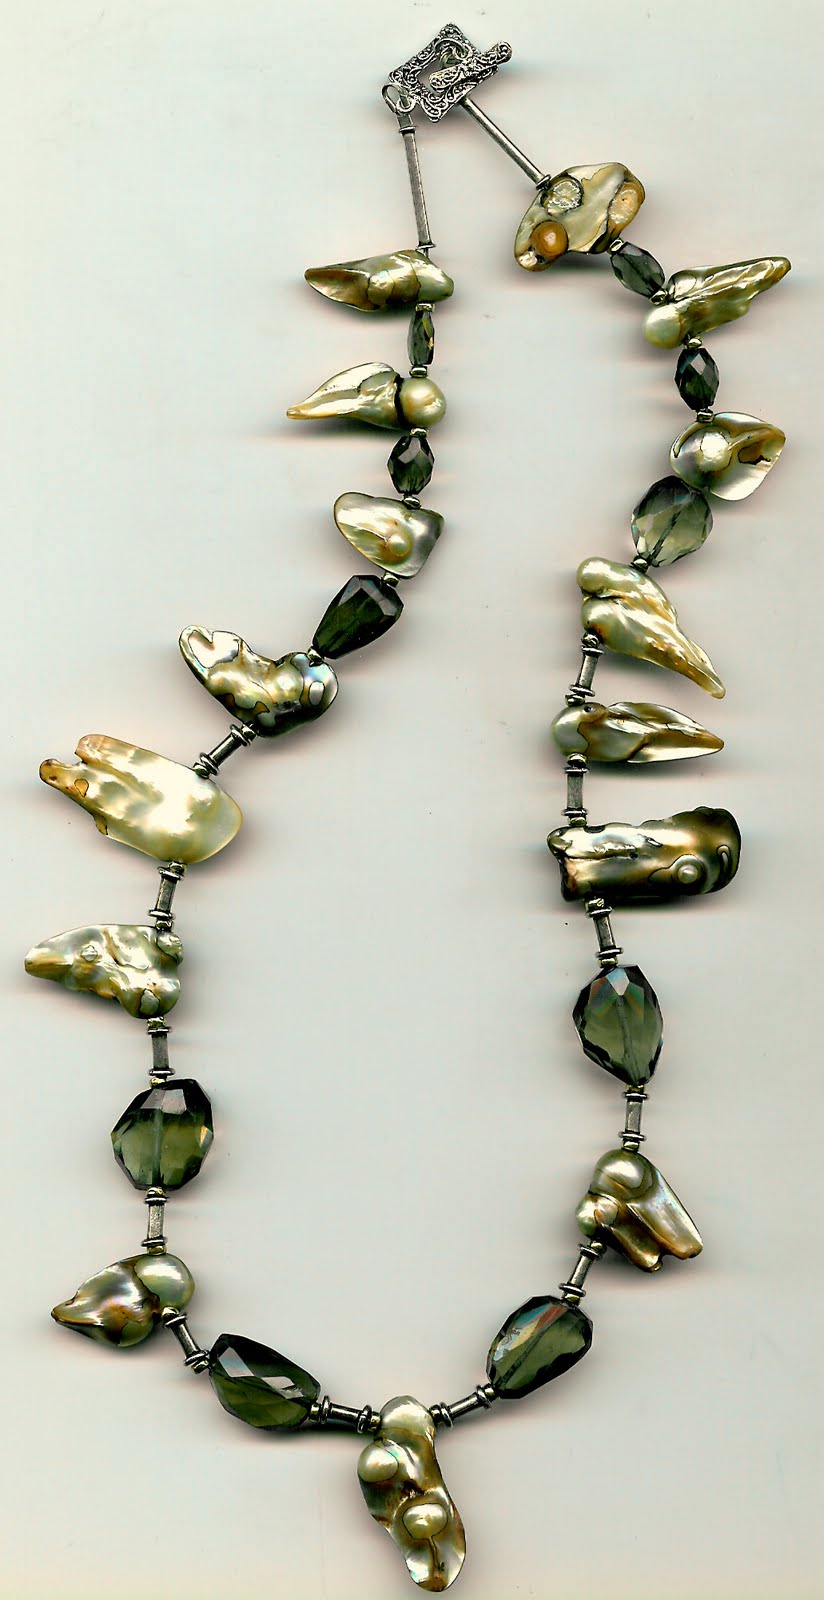 203. Blister Pearls with Bali  Sterling Silver edged in 14kt. Gold